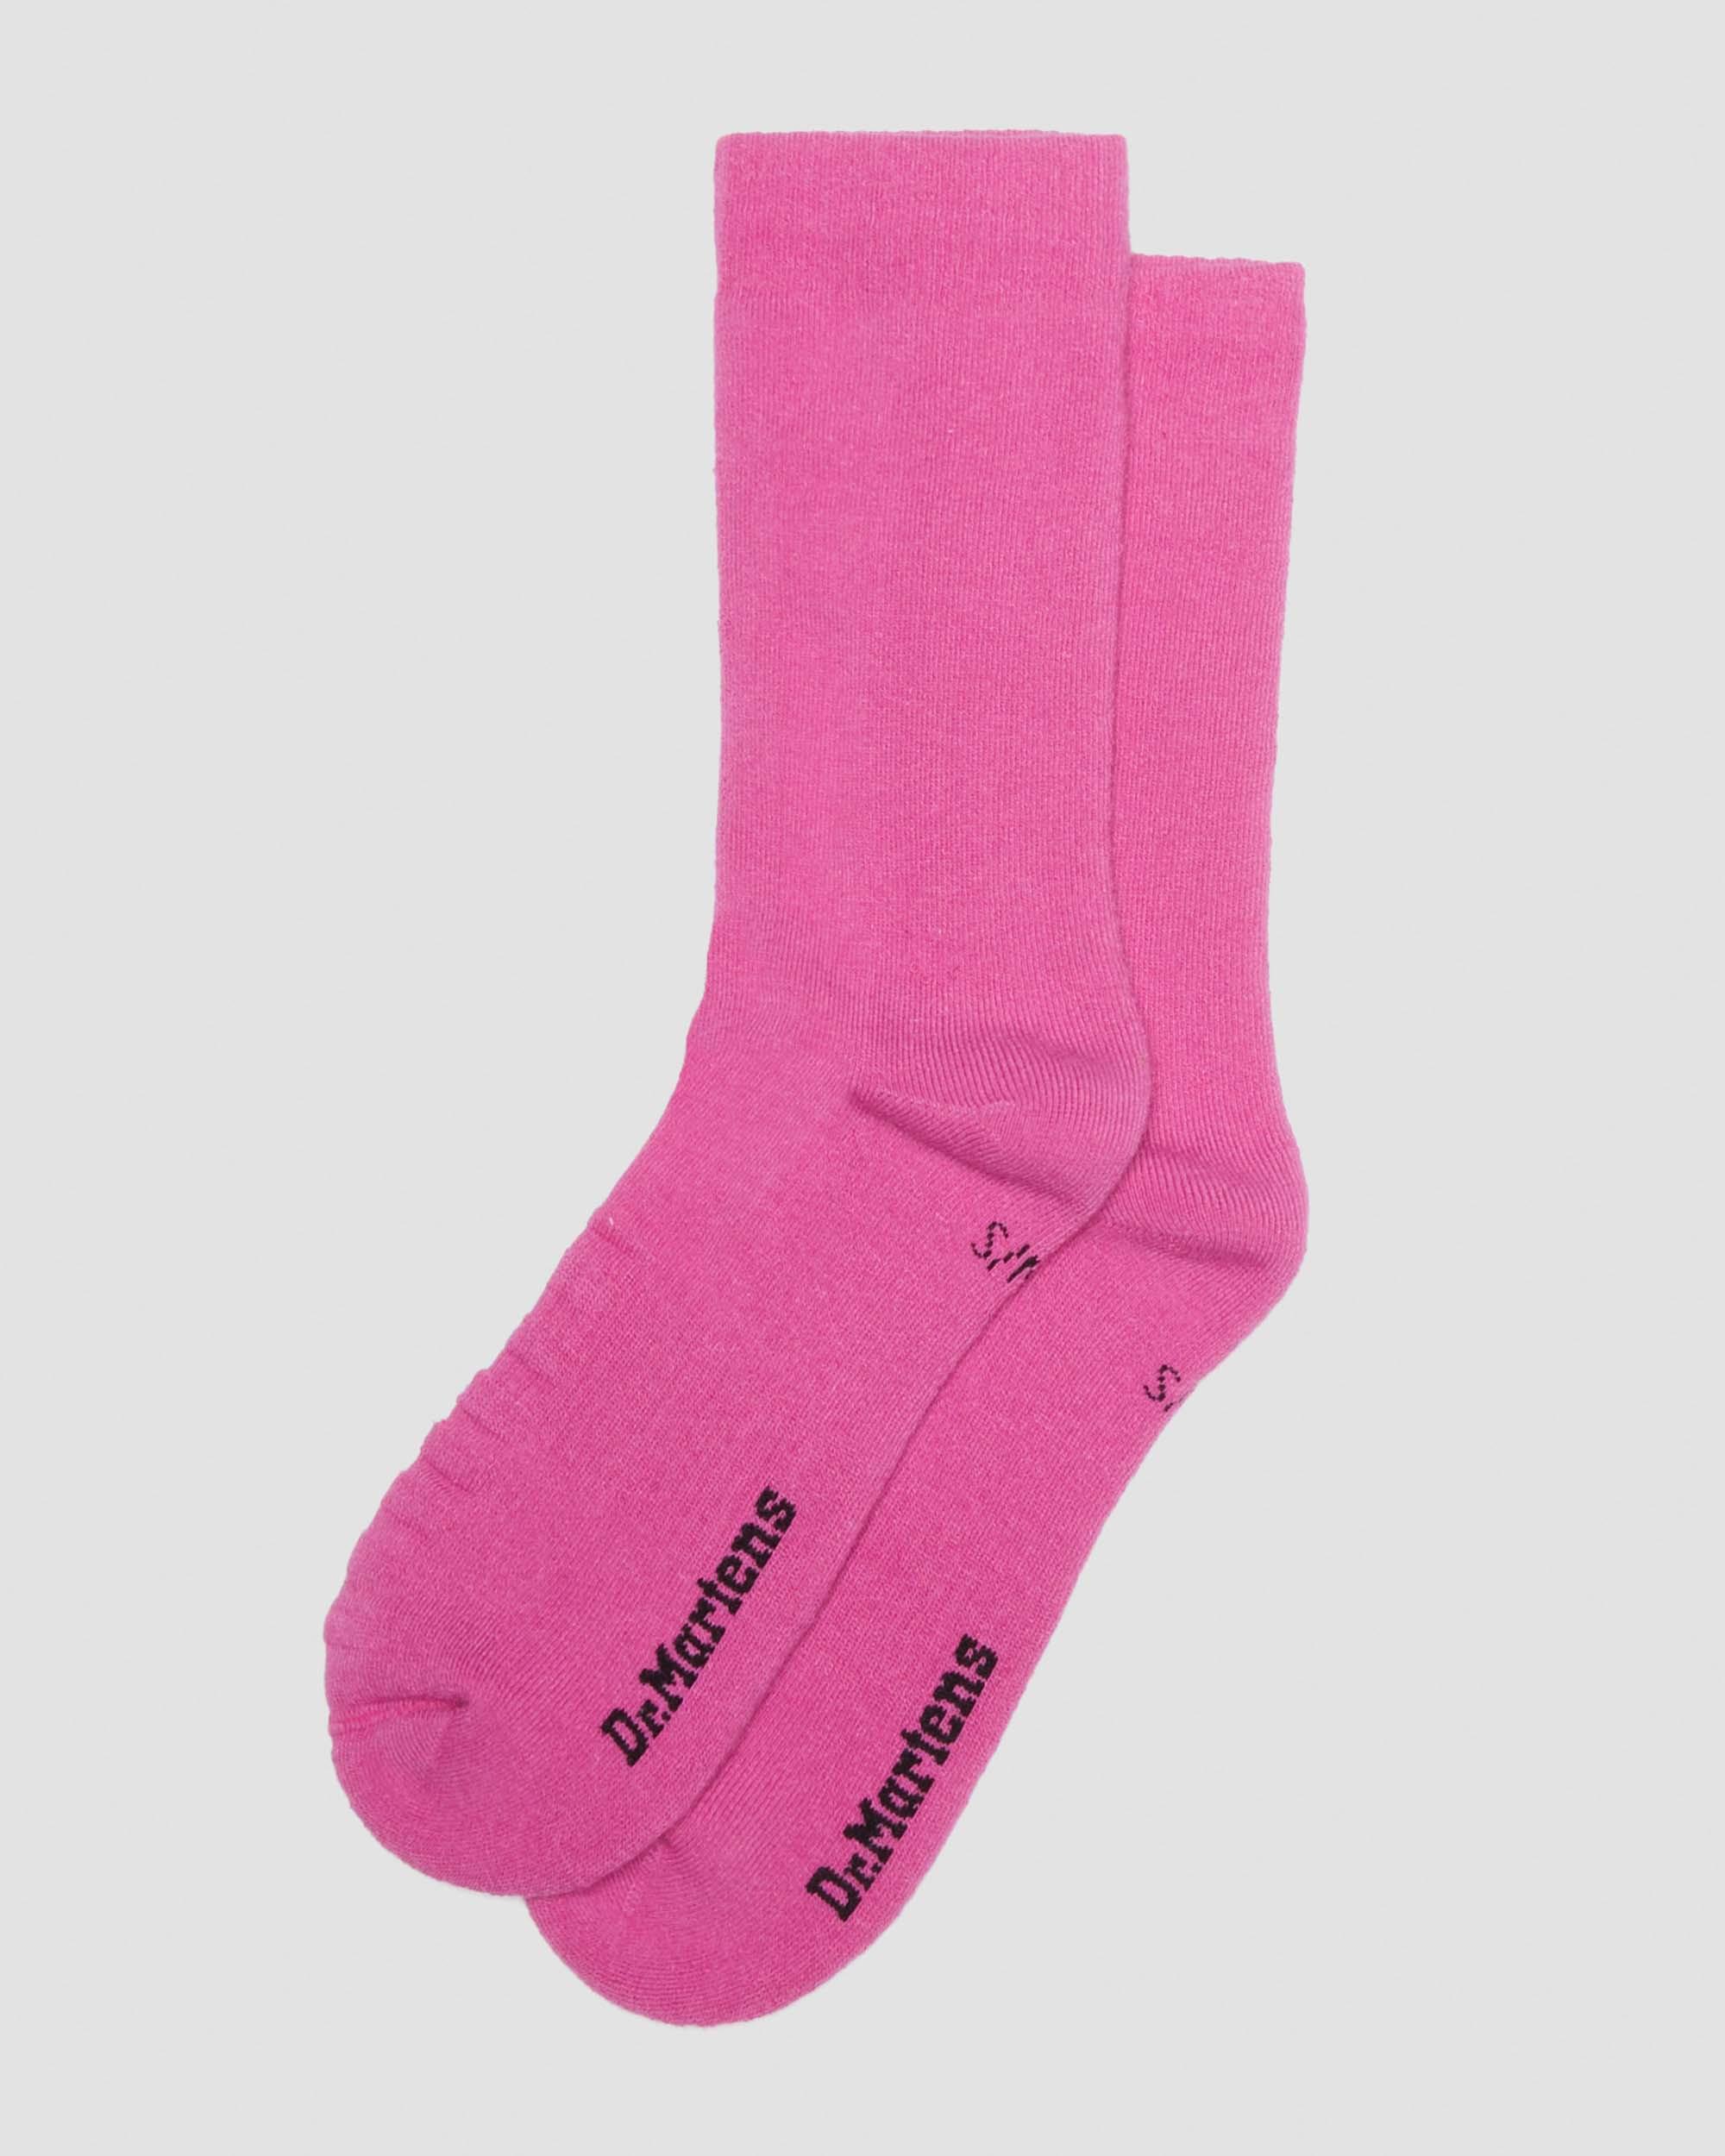 Double Doc Cotton Blend Socks in Charcoal